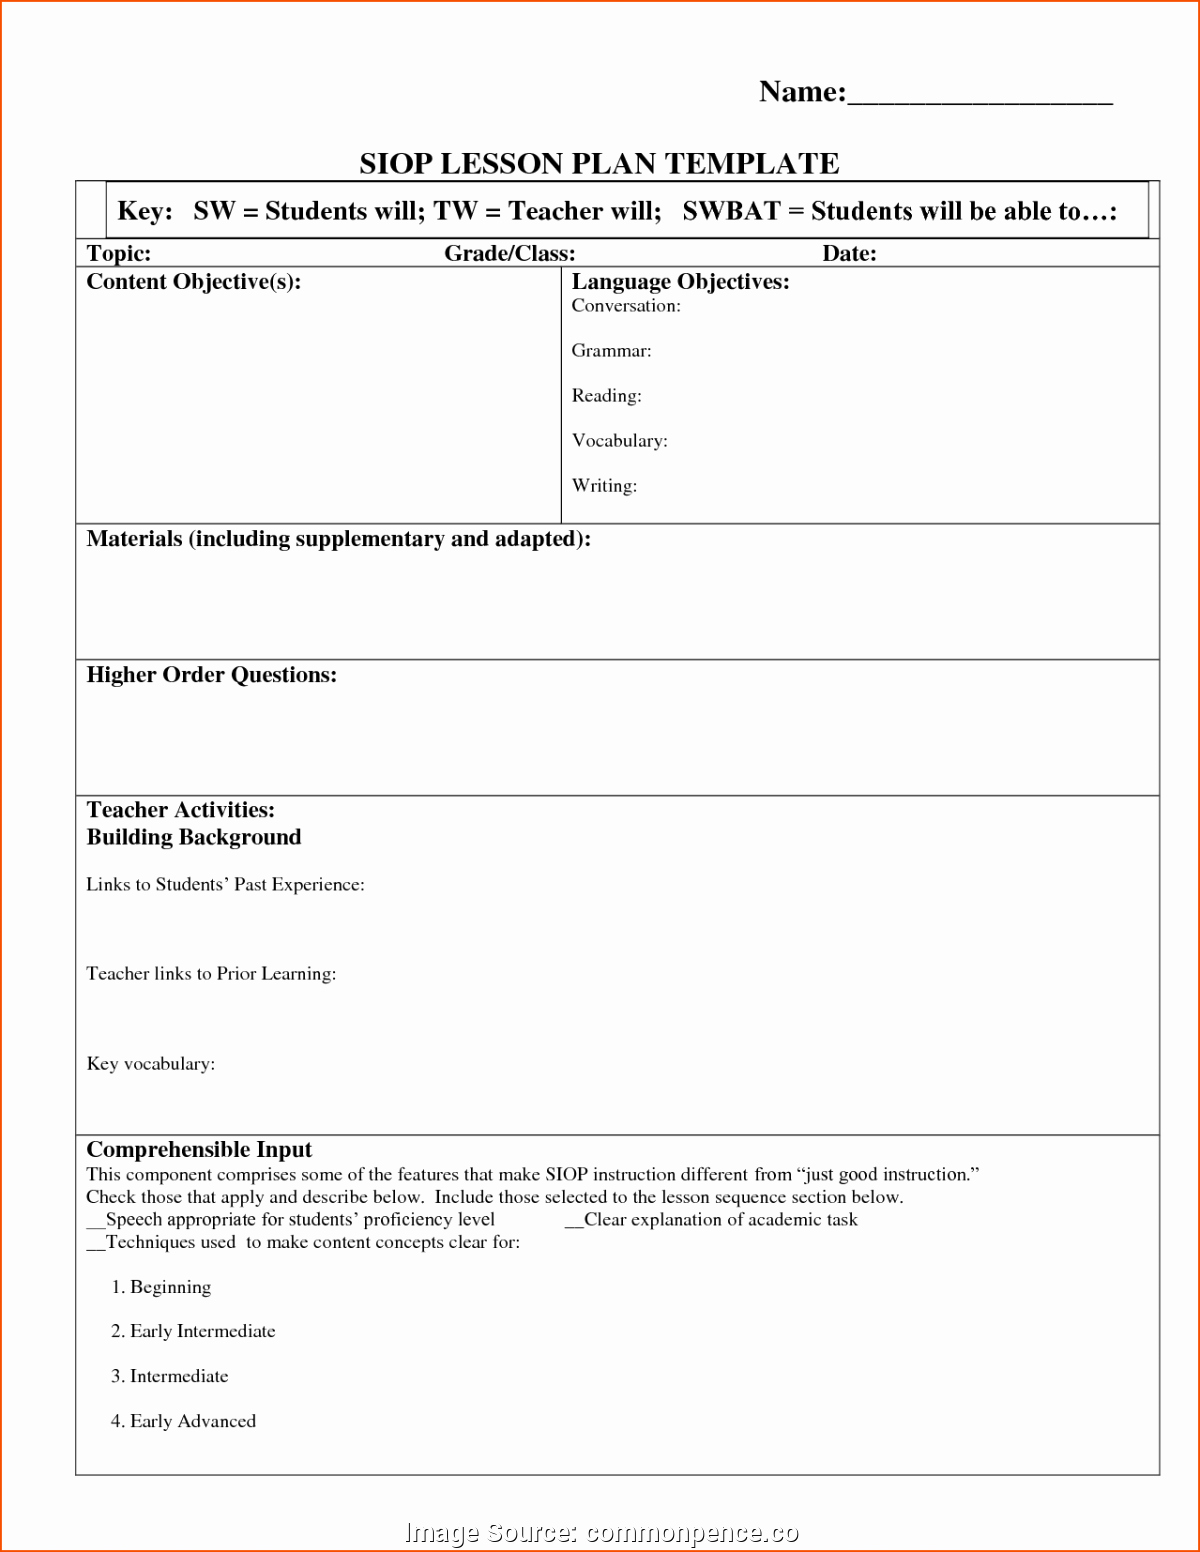 Siop Model Lesson Plan Template Inspirational Valuable Siop Lesson Plan Template 2 Pearson Siop Model Lesson Plan Template Monpenc